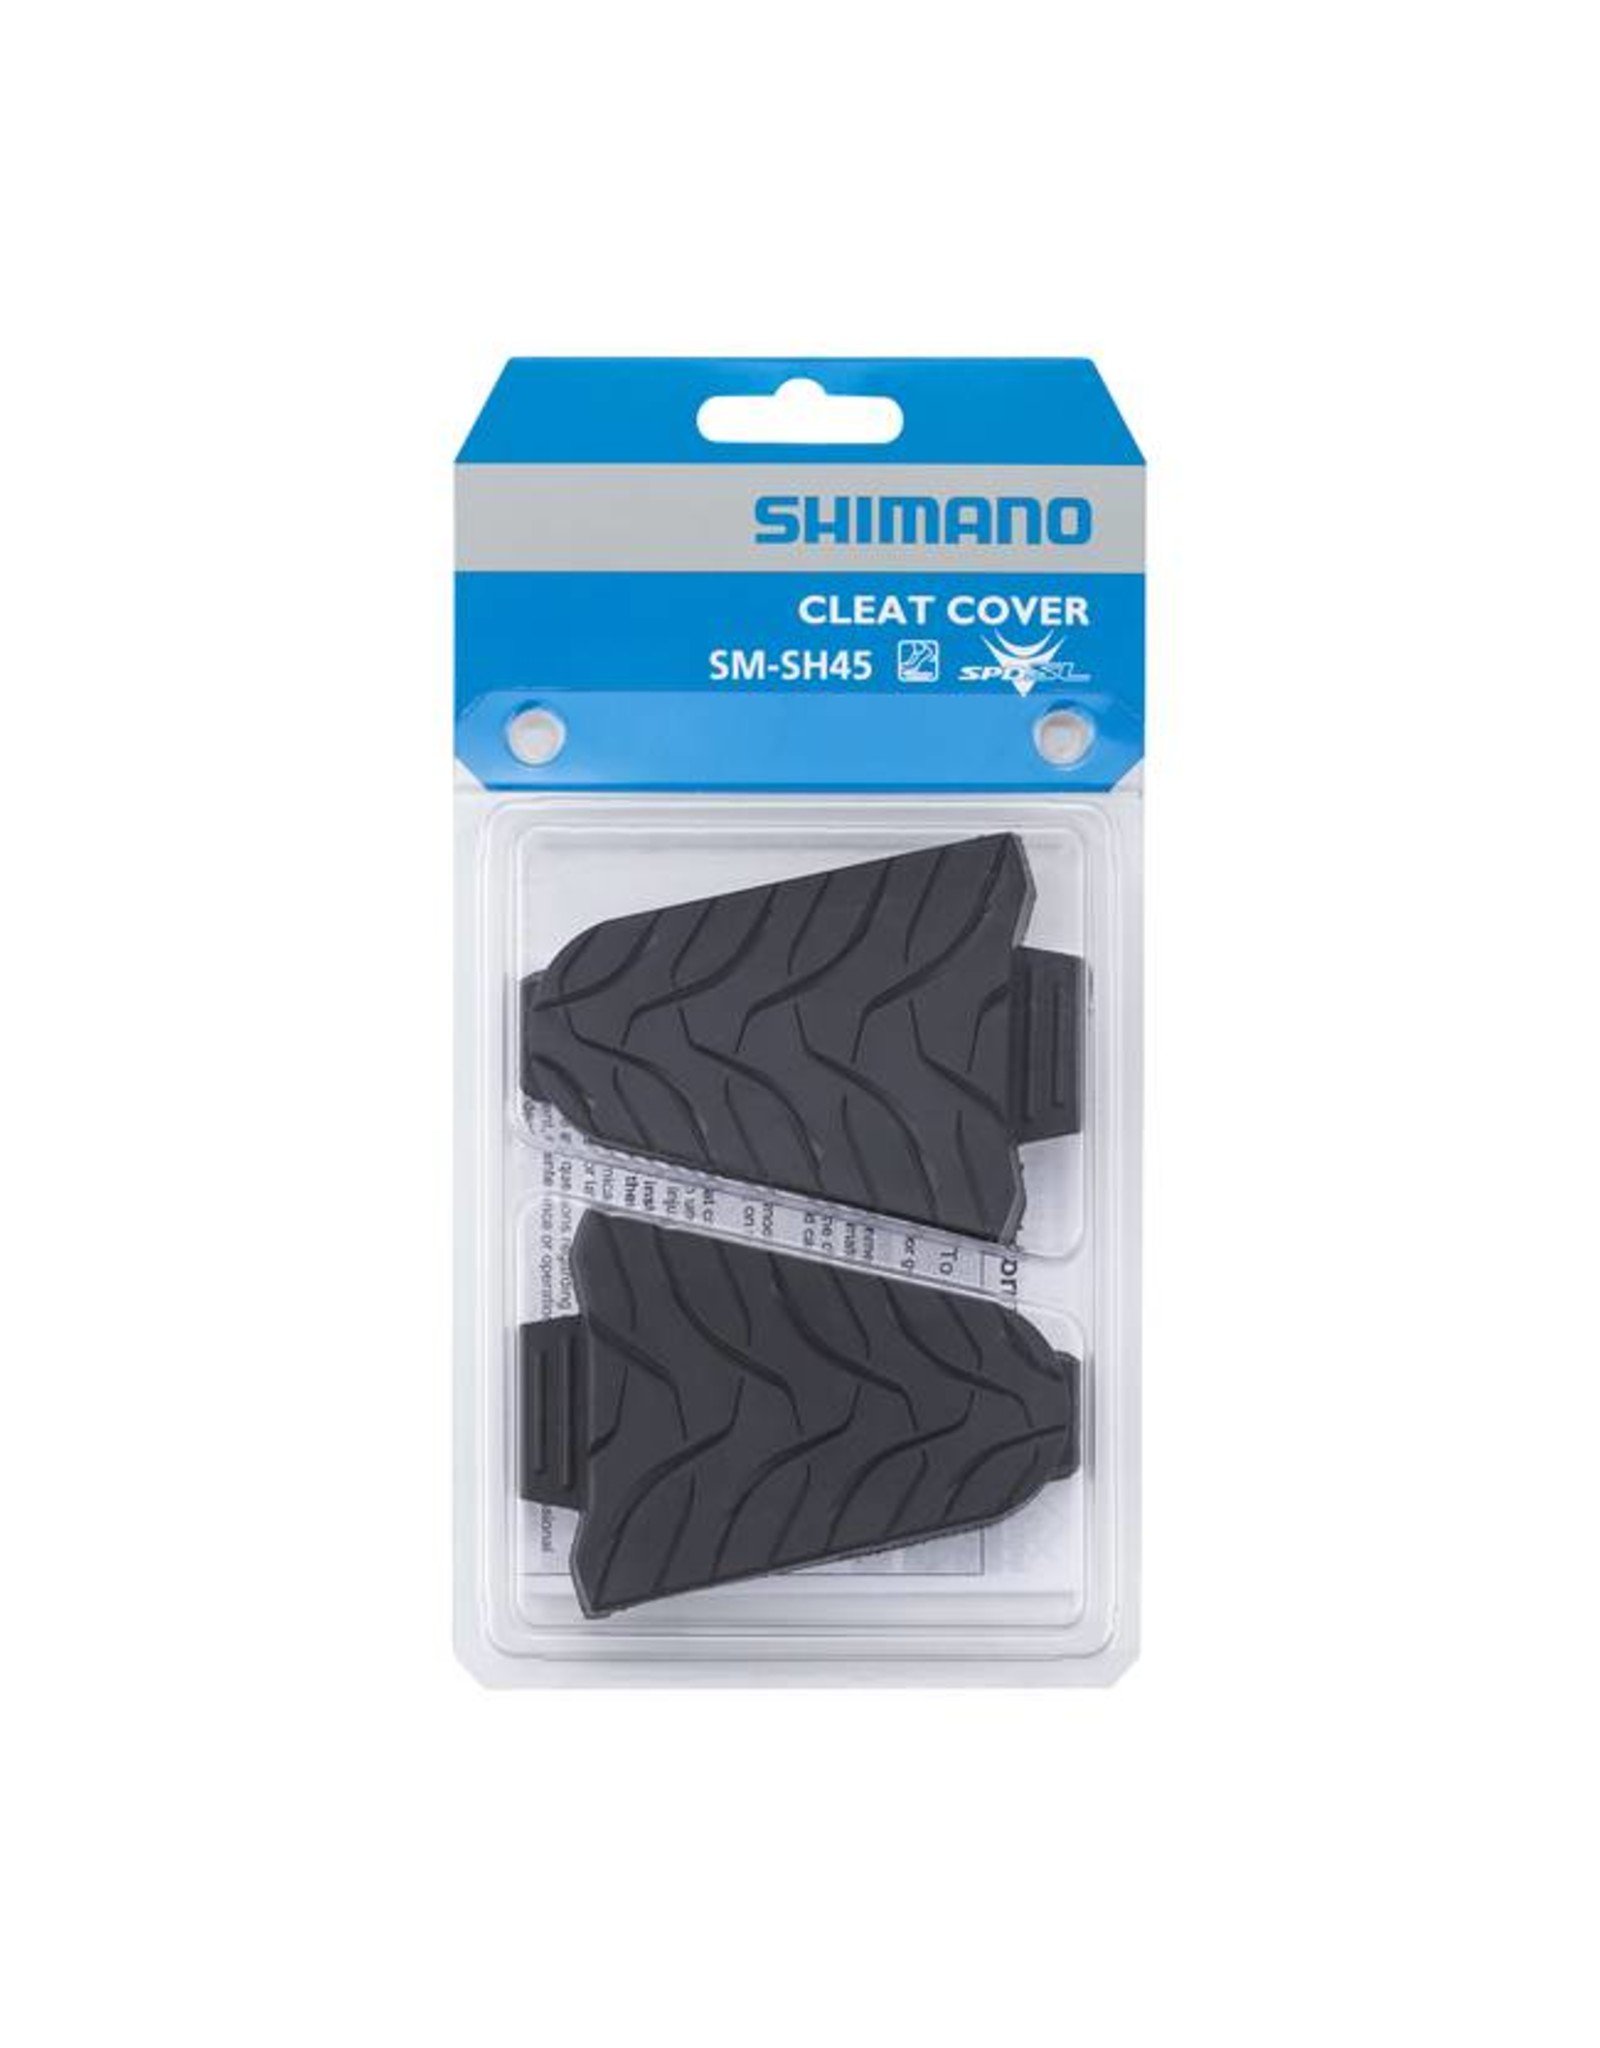 Shimano SM-SH45 SPD-SL Cleat Covers - Cycle Solutions